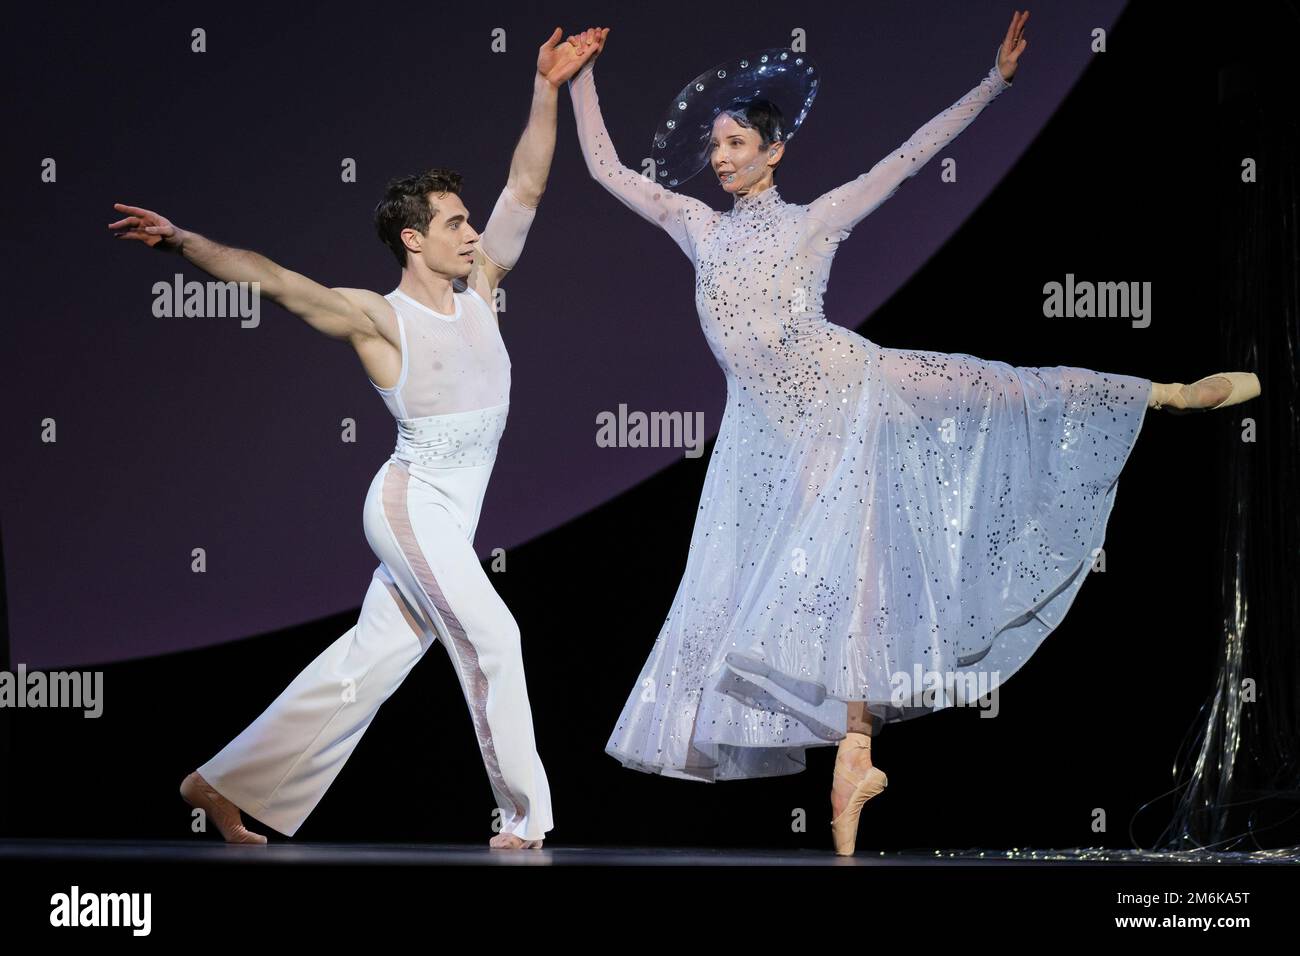 Anna Blackwell (R) and Simone Tribuna (L) of the Monte-Carlo ballet perform  in Coppel-i.A a creation by French choreographer Jean-Christophe Maillot in  Madrid. The show will take place from 5 to 8 January at the Canal theater  in Madrid. (Photo by Atilano ...